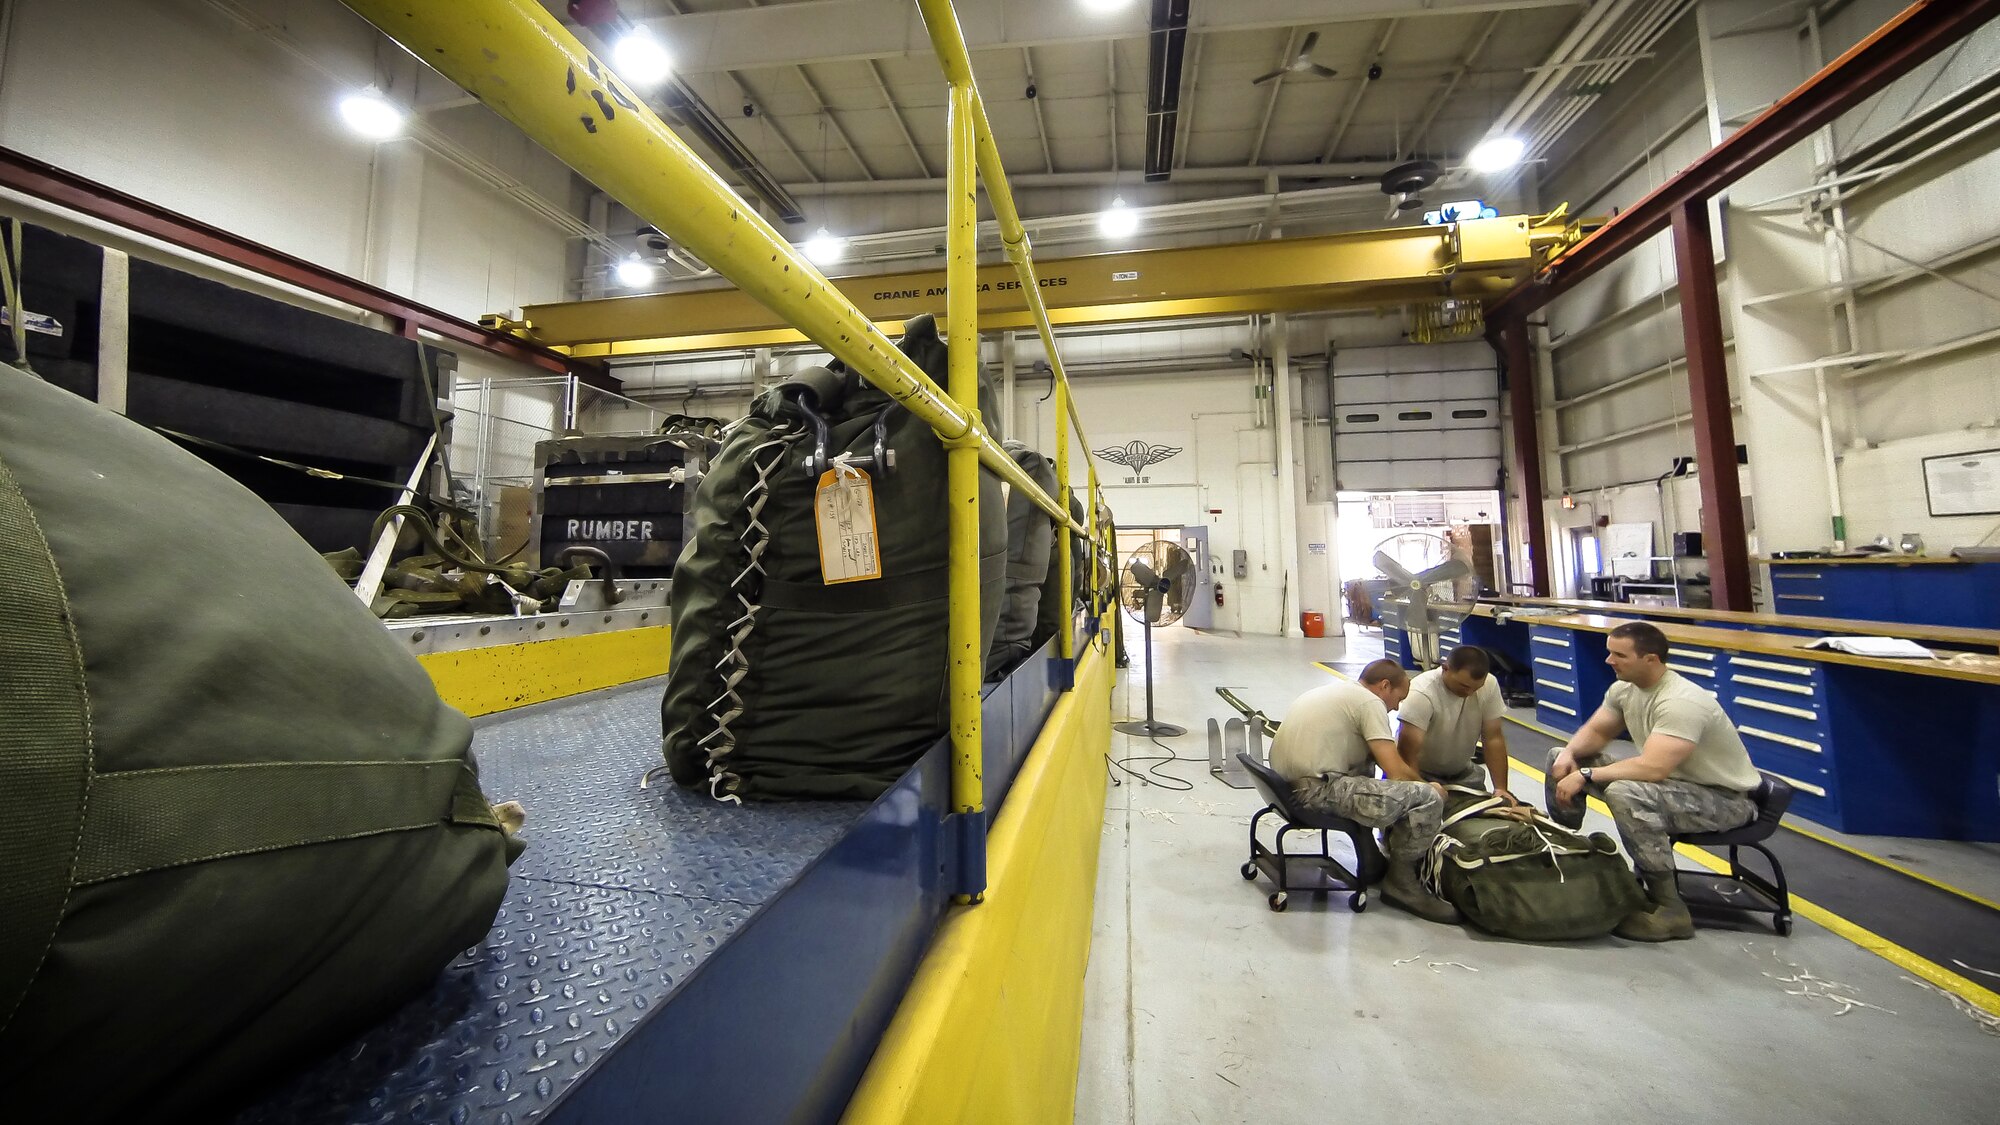 Technical Sgt. Jesse Sorrell (left), Technical Sgt. Jeremy Martinson and Technical Sgt. Joshua Ellis ties up a G-12E Type V platform parachute after recovering it from the dropzone on June 6, 2015. The Airman from the 182d Airlift Wing, Small Air Terminal, Peoria, Ill. check and repack the parachute after it was used in a recent C-130 air drop training mission with heavy equipment at the dropzone. (U.S. Air National Guard photo by Master Sgt. Scott Thompson/Released)